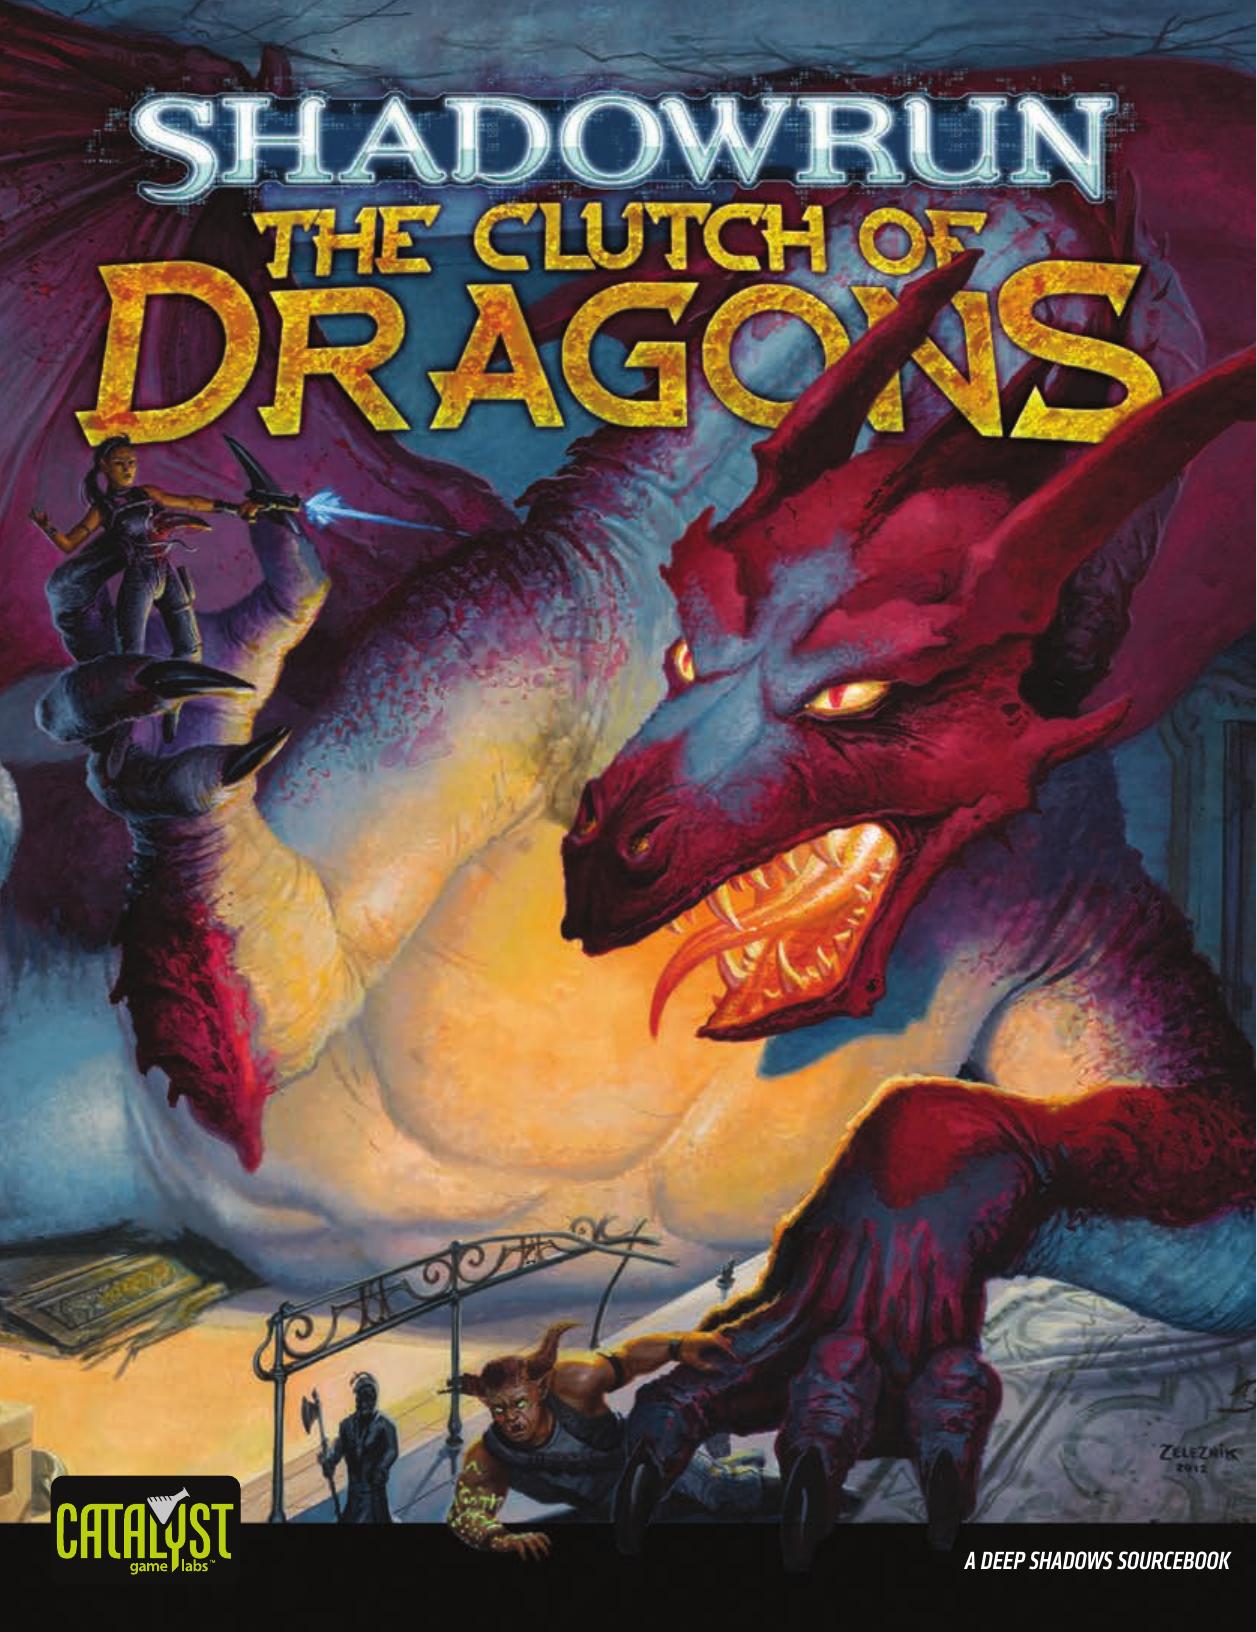 The Clutch of Dragons